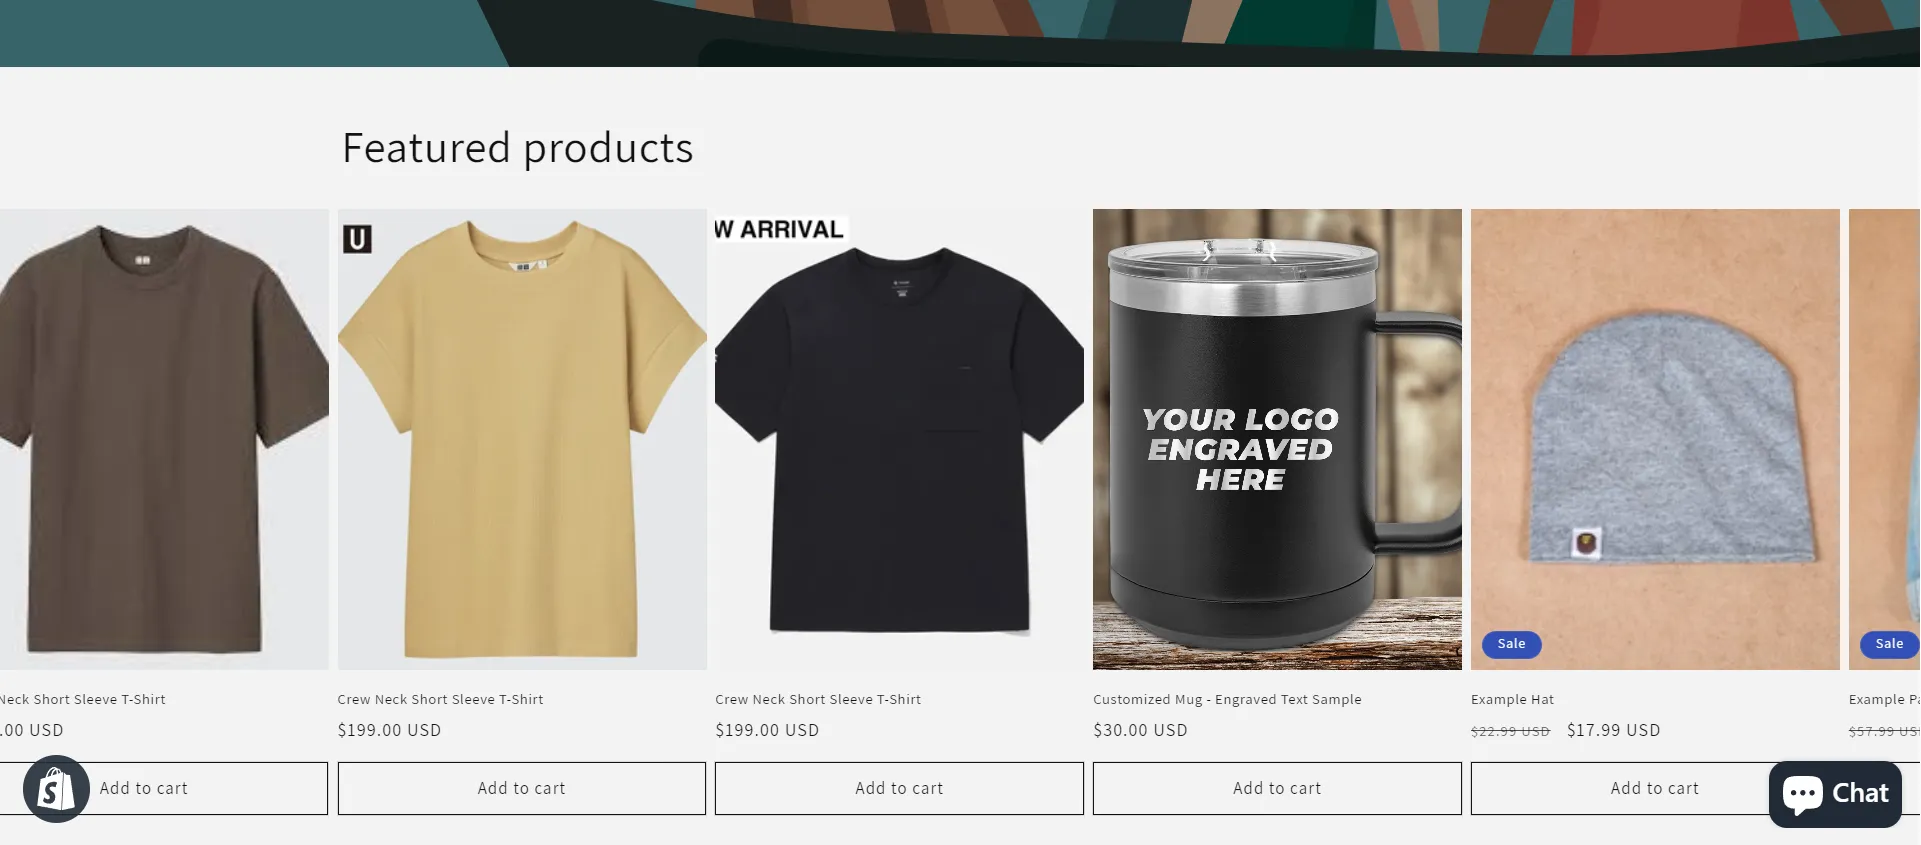 How to add an add-to-cart button on simple theme Shopify